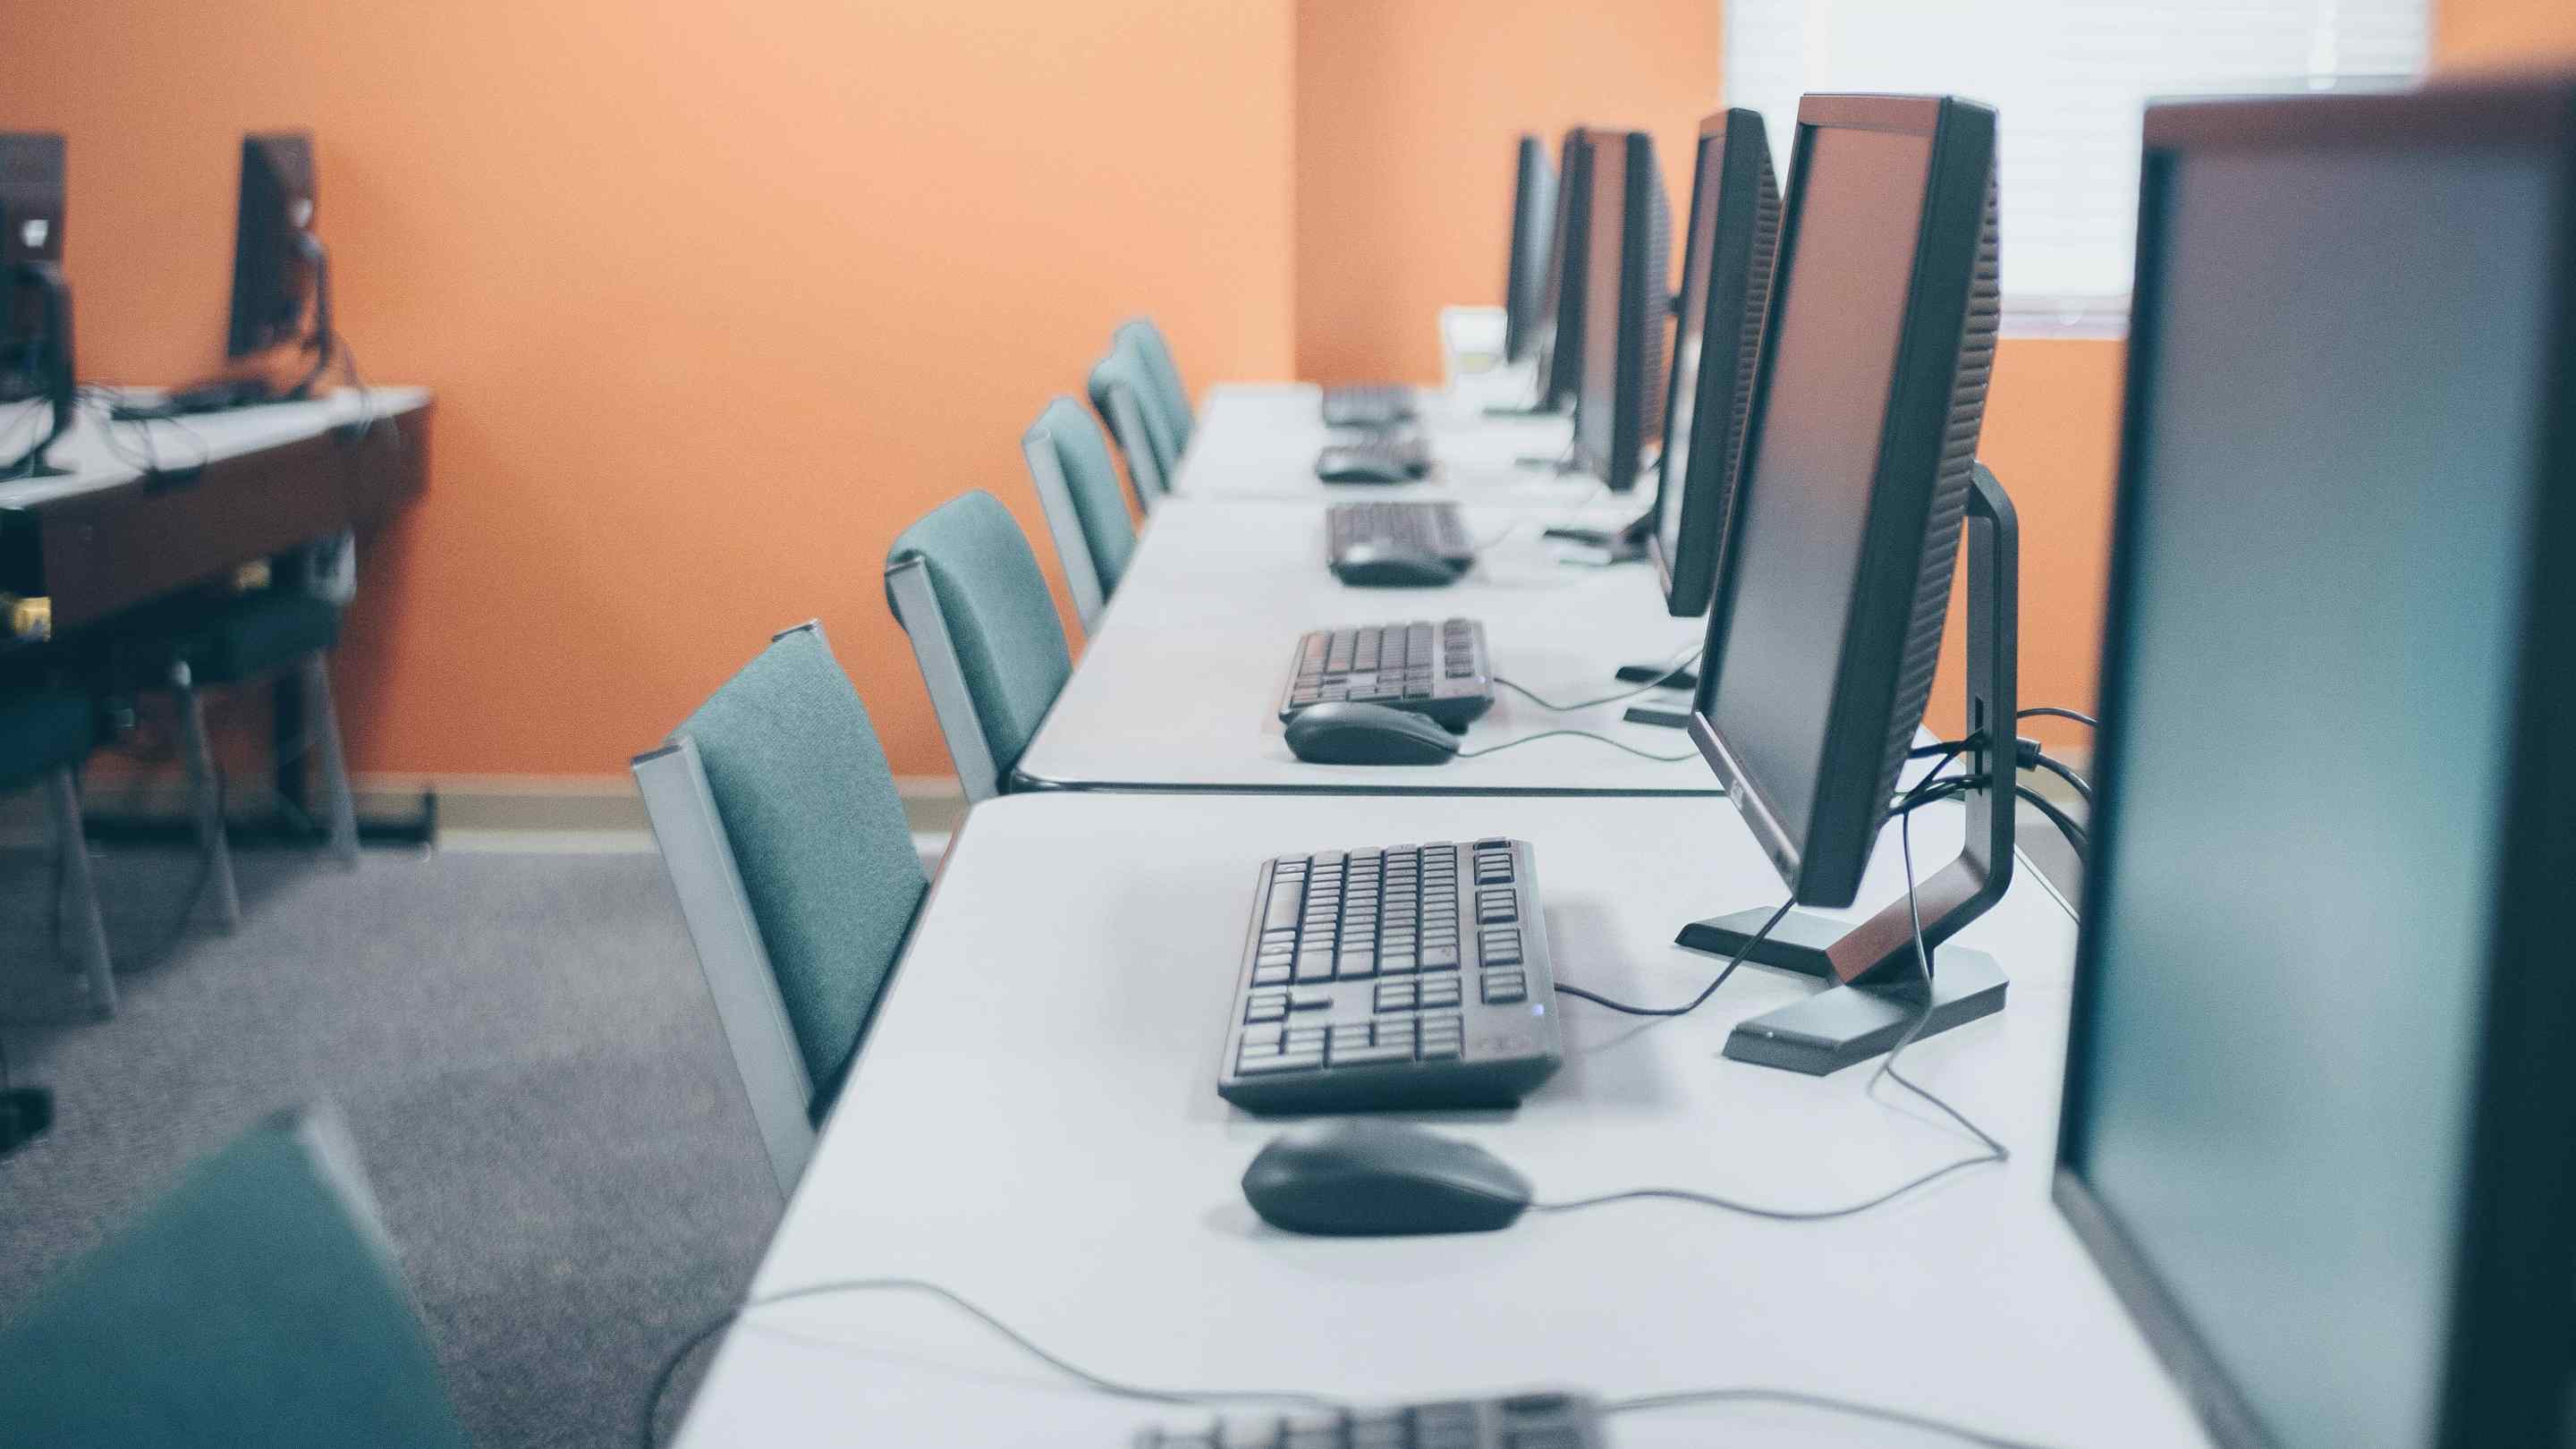 A row of computer monitors and keyboards on a white table, in front of empty chairs